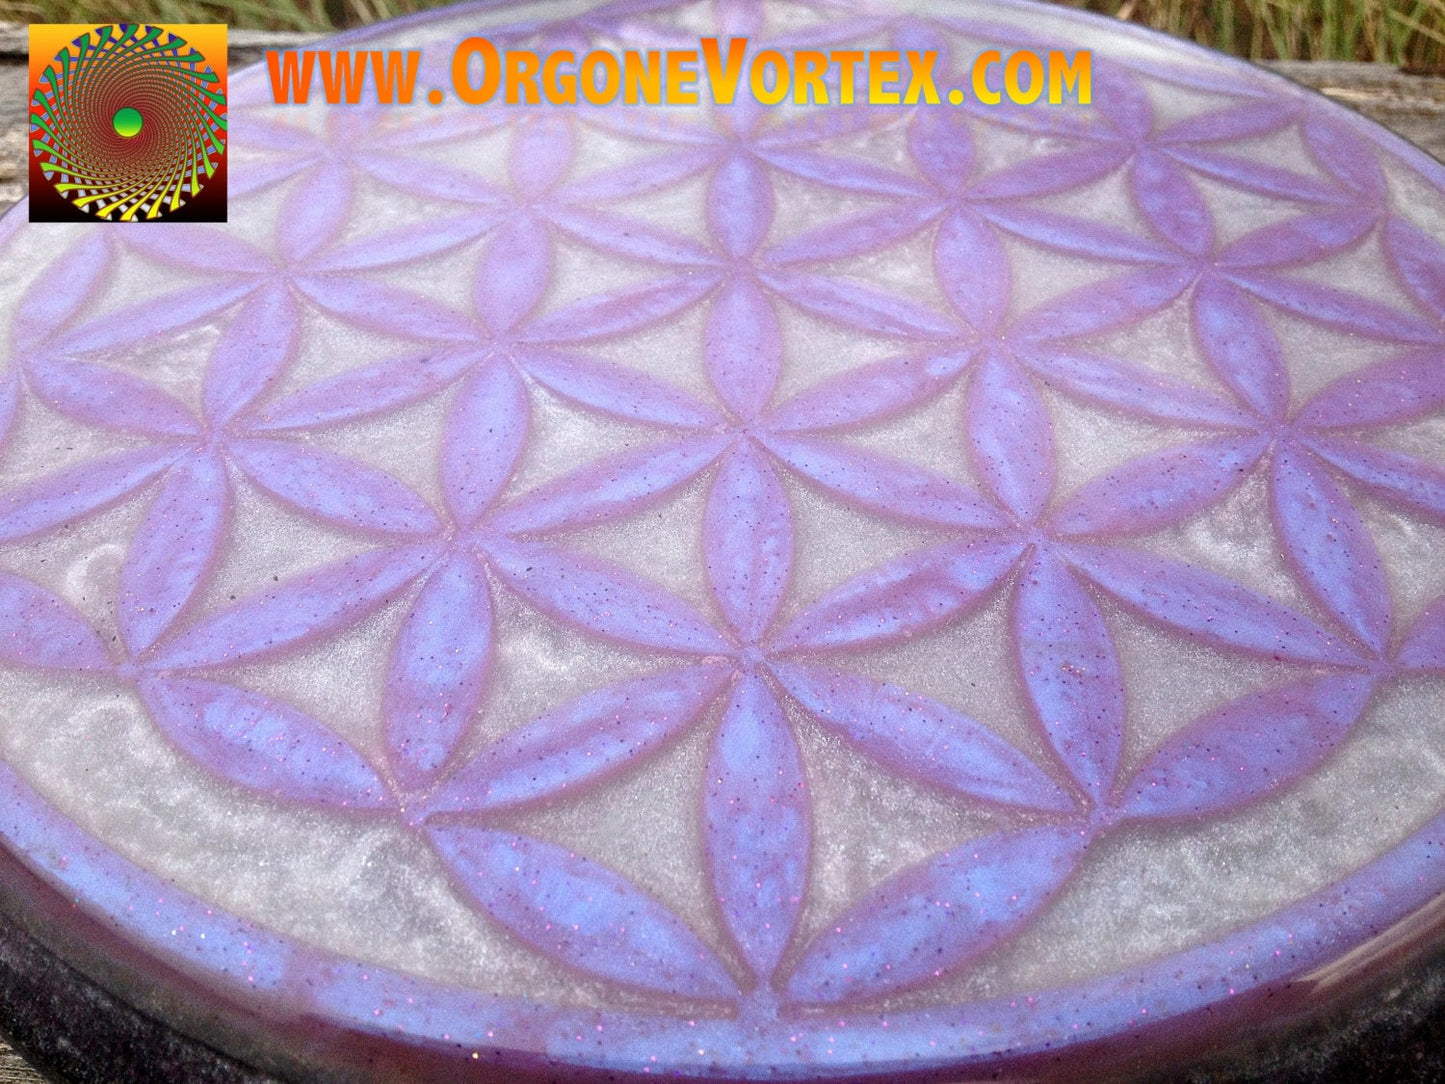 CUSTOM-Made to Order-  Orgone Flower of Life Power Plate 10 inch - Any Color - Structure Drinks -Energy Balance - Sleep Aid - EMF Protection